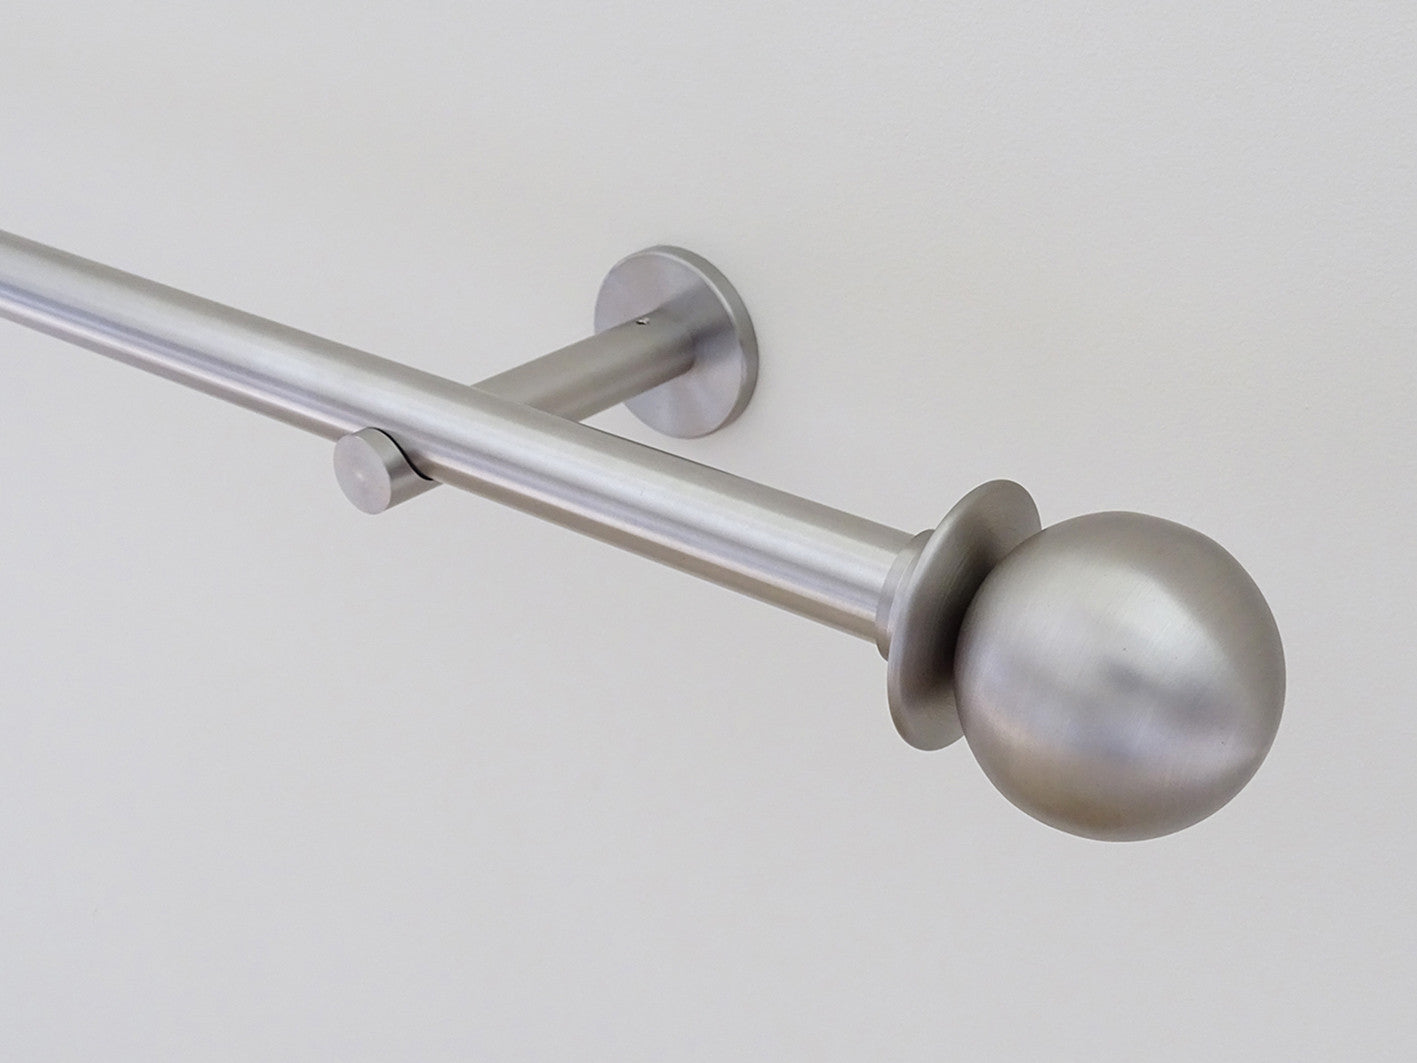 19mm diameter stainless steel curtain pole set with metal ball finials